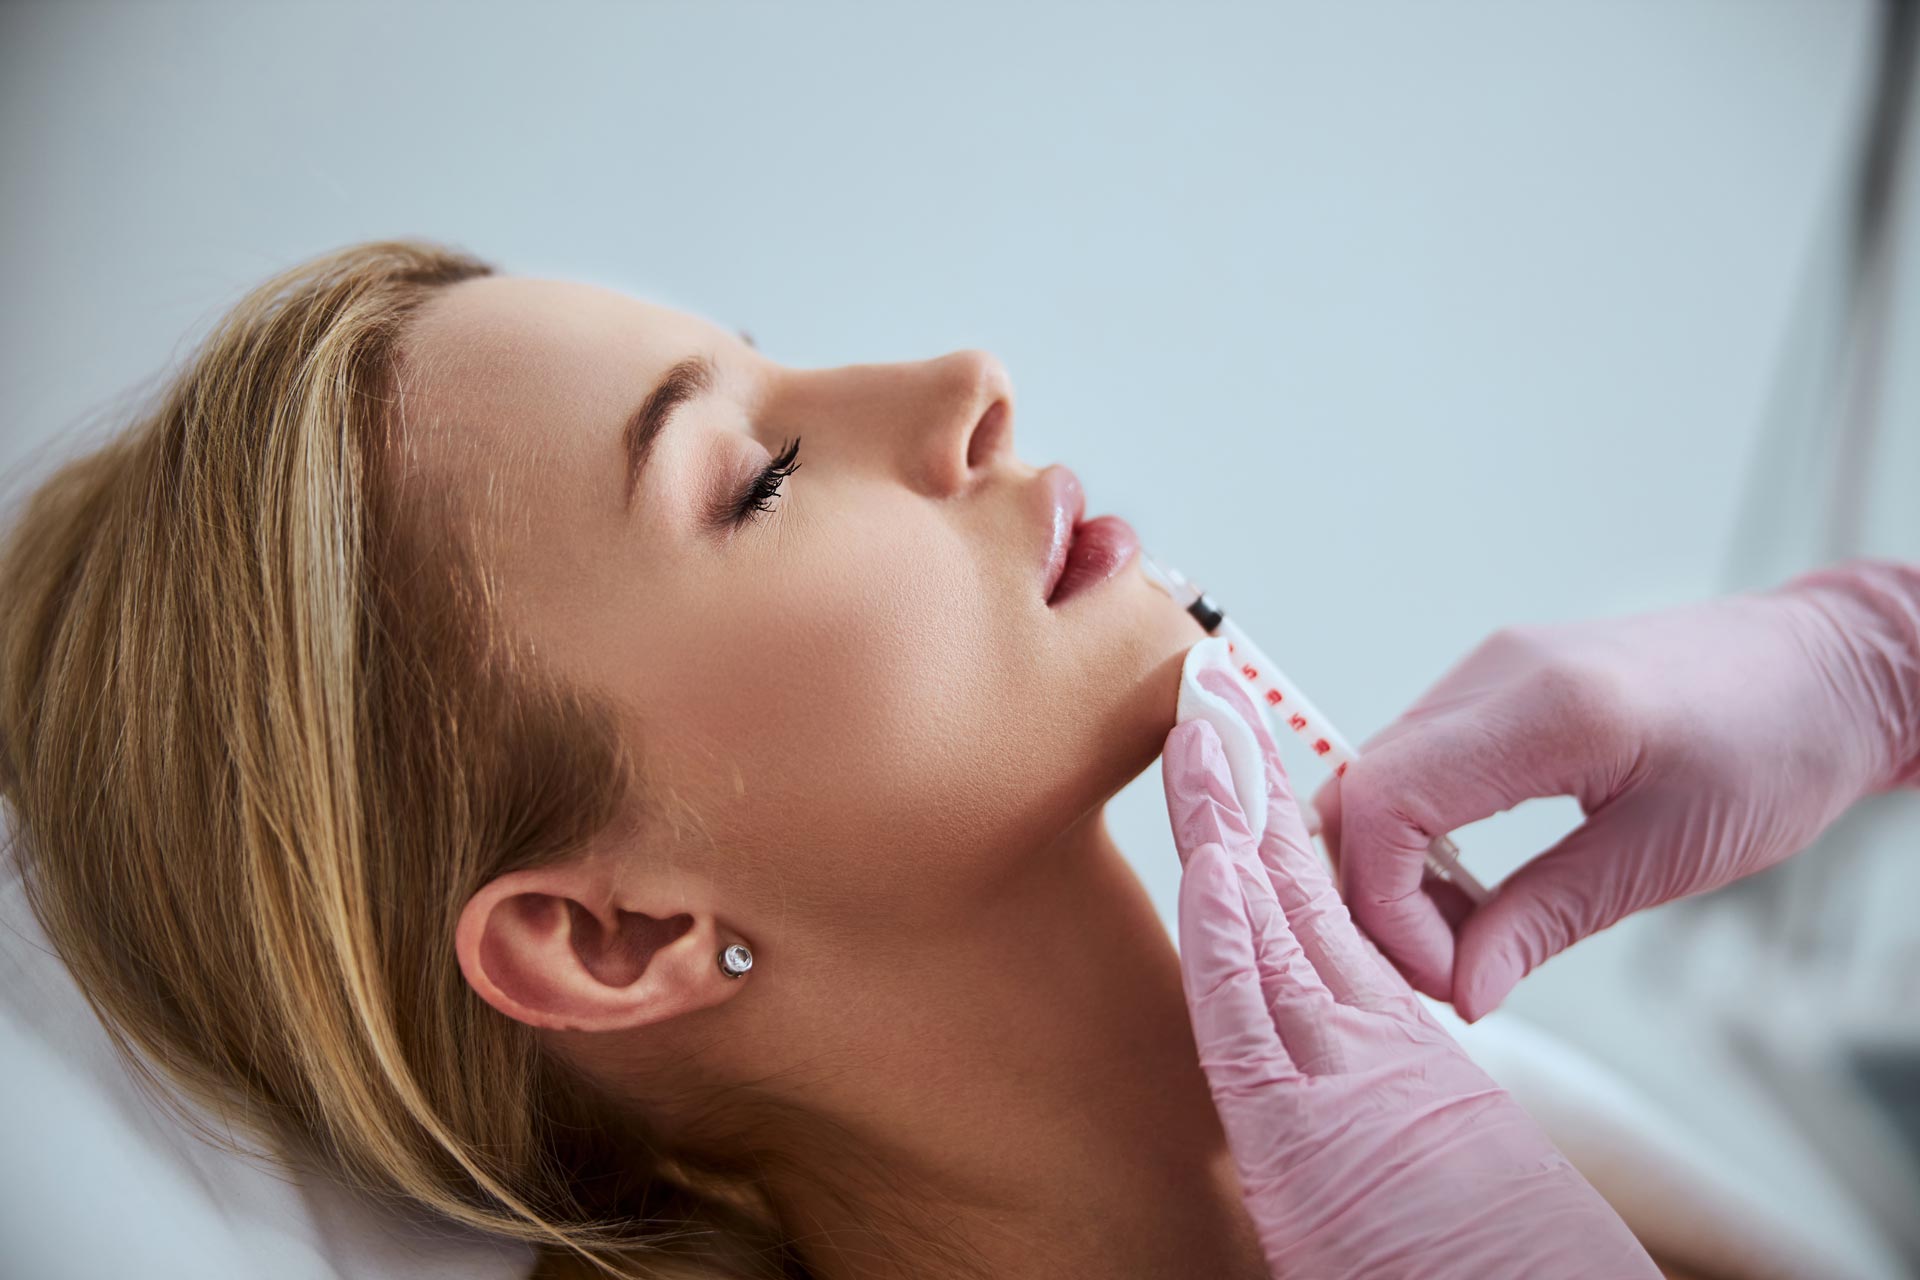 How Long Do Dermal Fillers Usually Last?